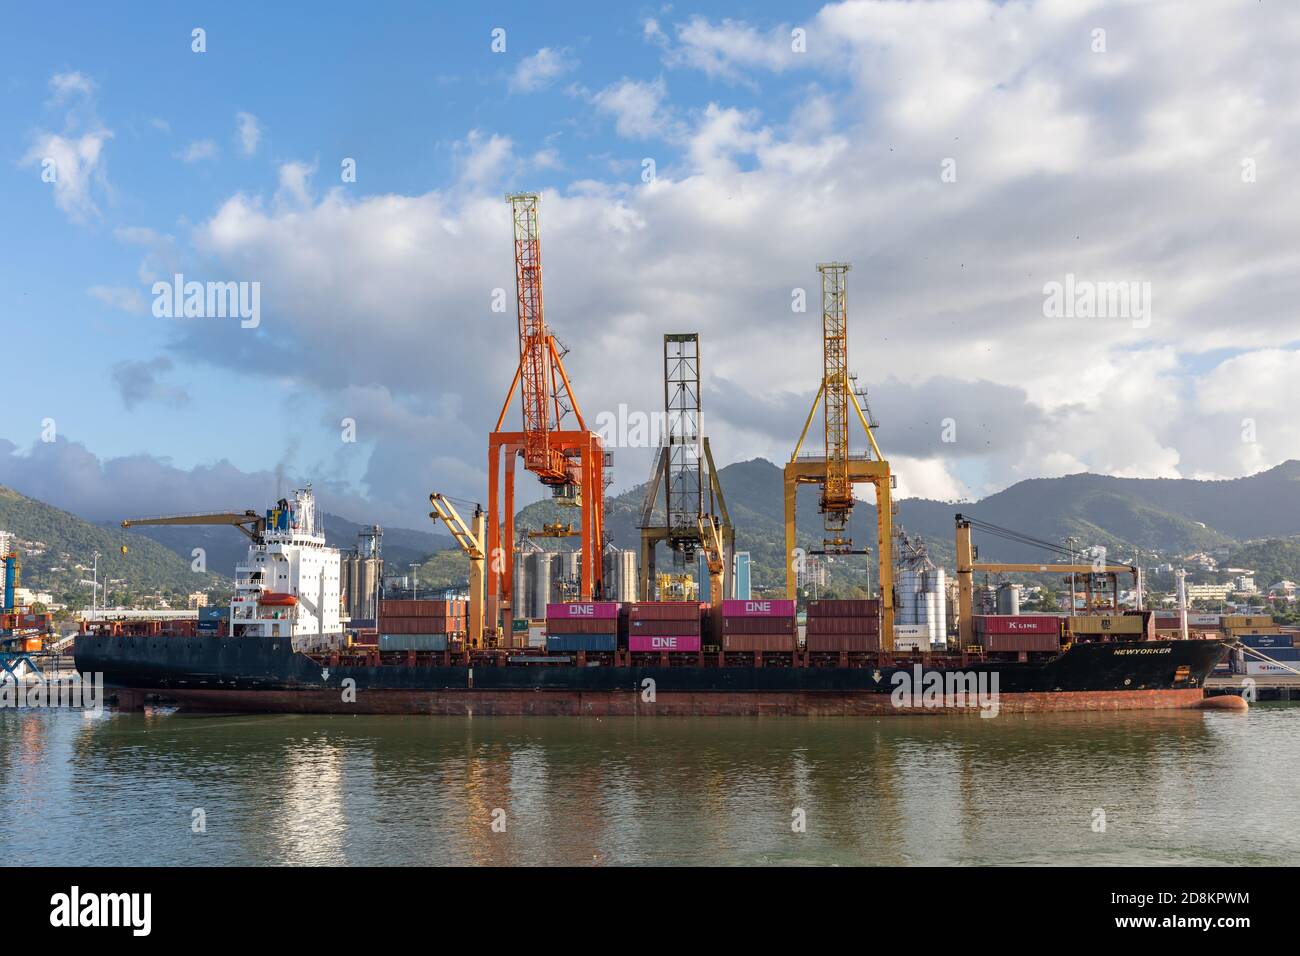 08 JAN 2020 - Port of Spain, Trinidad and Tobago - Cargo loading in the harbor Stock Photo